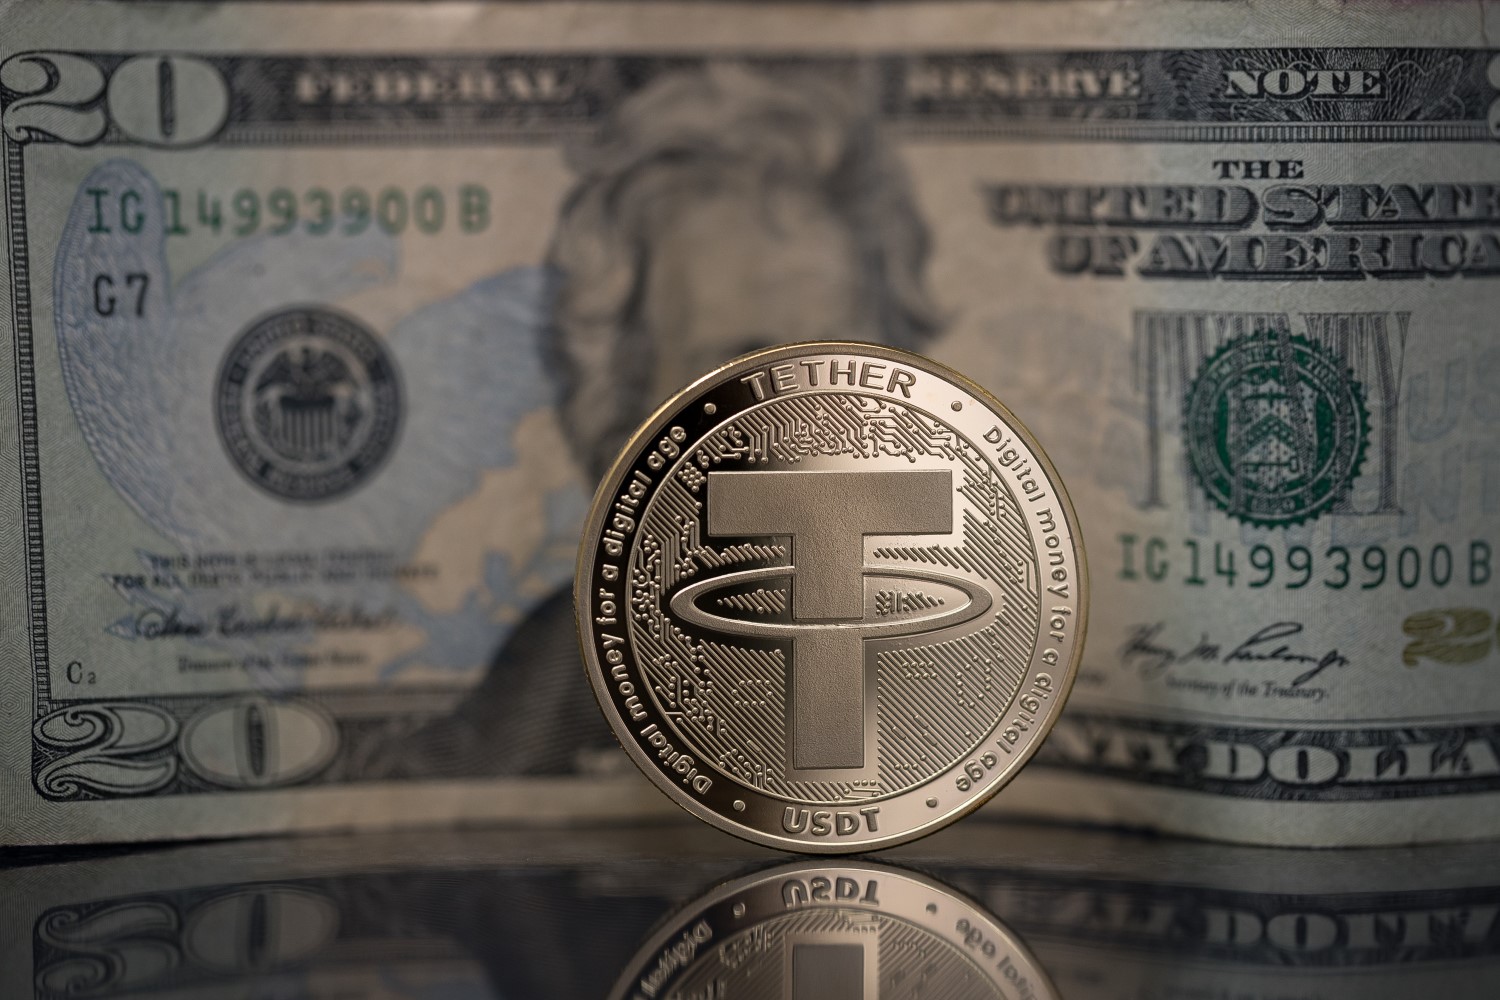 Tether Lawyer Admits Stablecoin Now 74% Backed By Cash And Equivalents